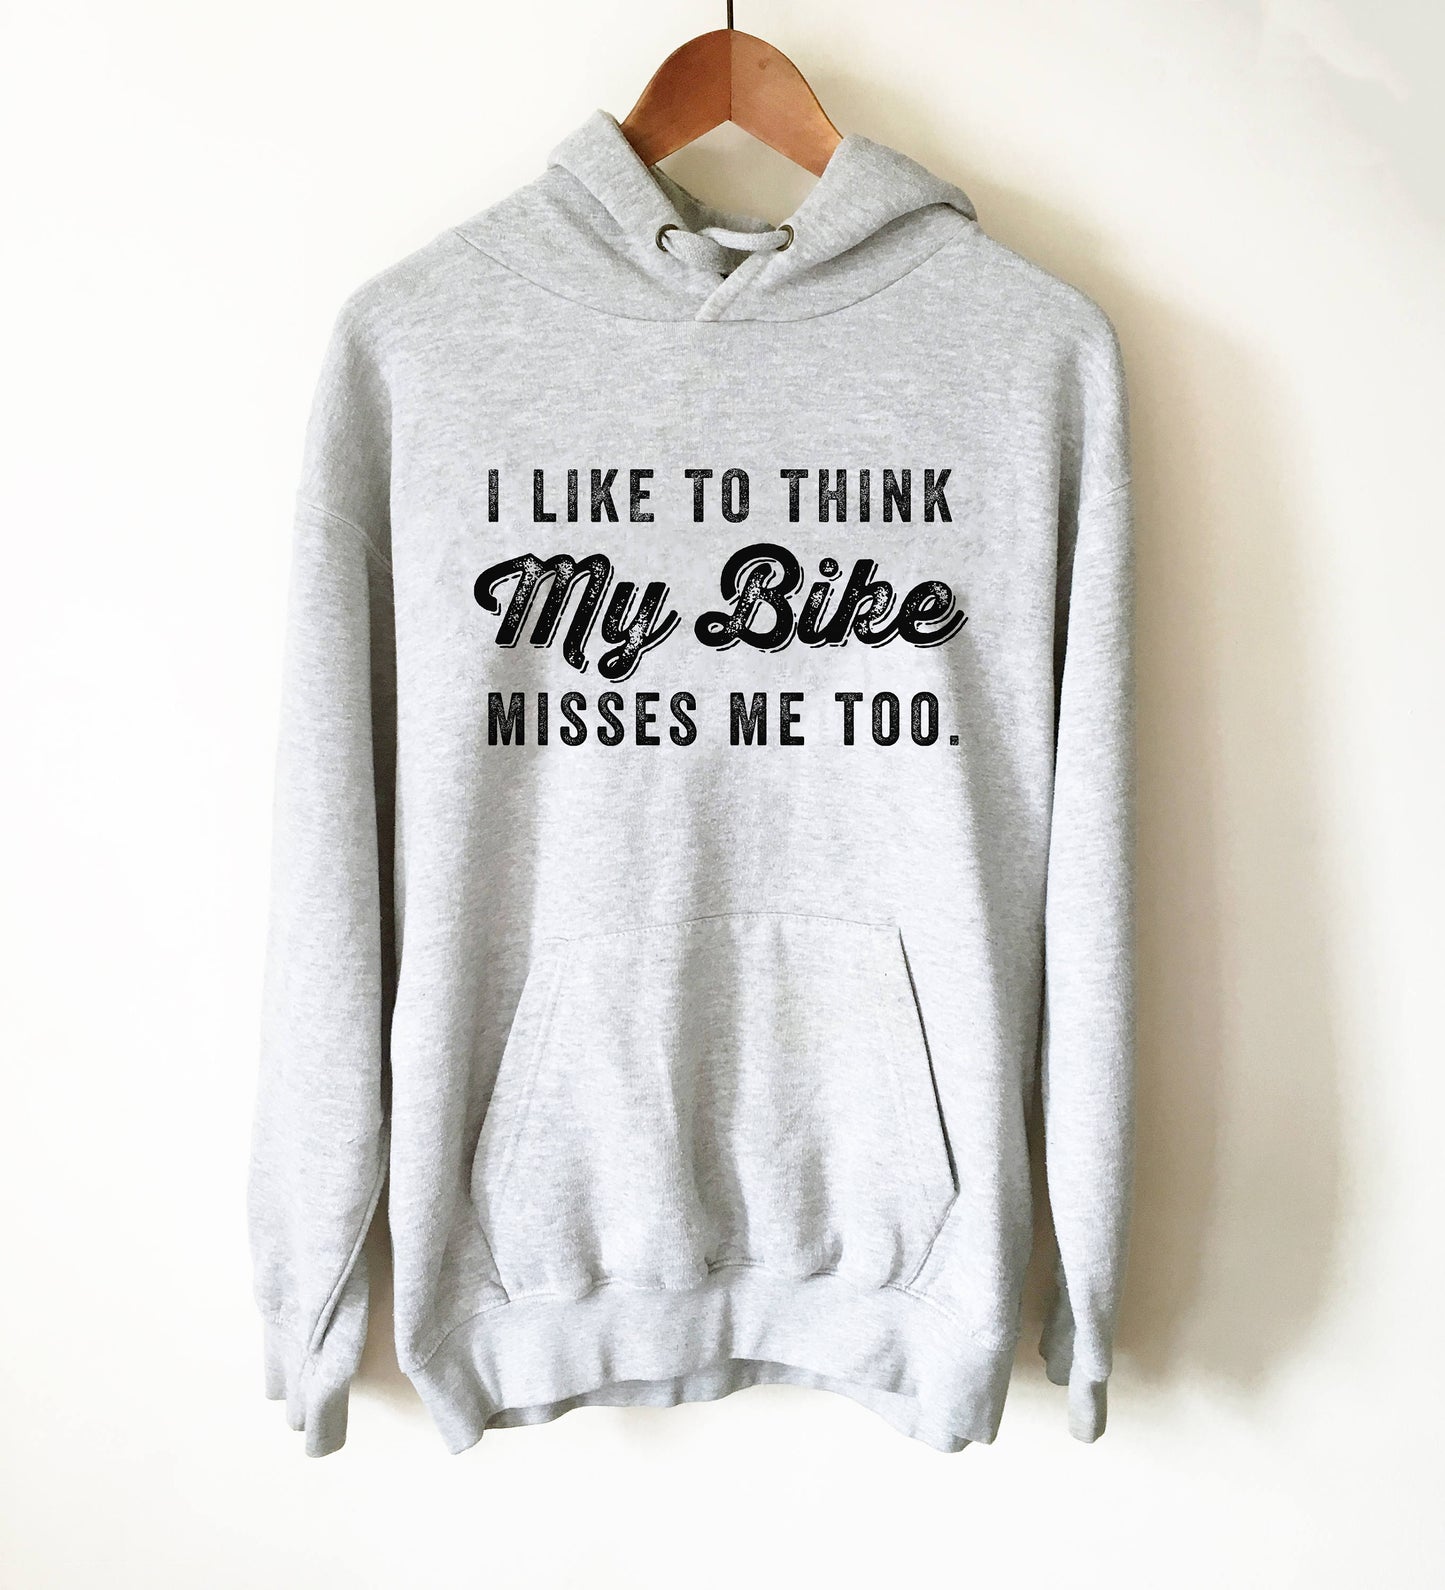 I Like To Think My Bike Misses Me Too Hoodie - Cycling hoodie, Cyclists gift, Bicycle shirt, Bicycle tshirt women, Bicycle lover gift